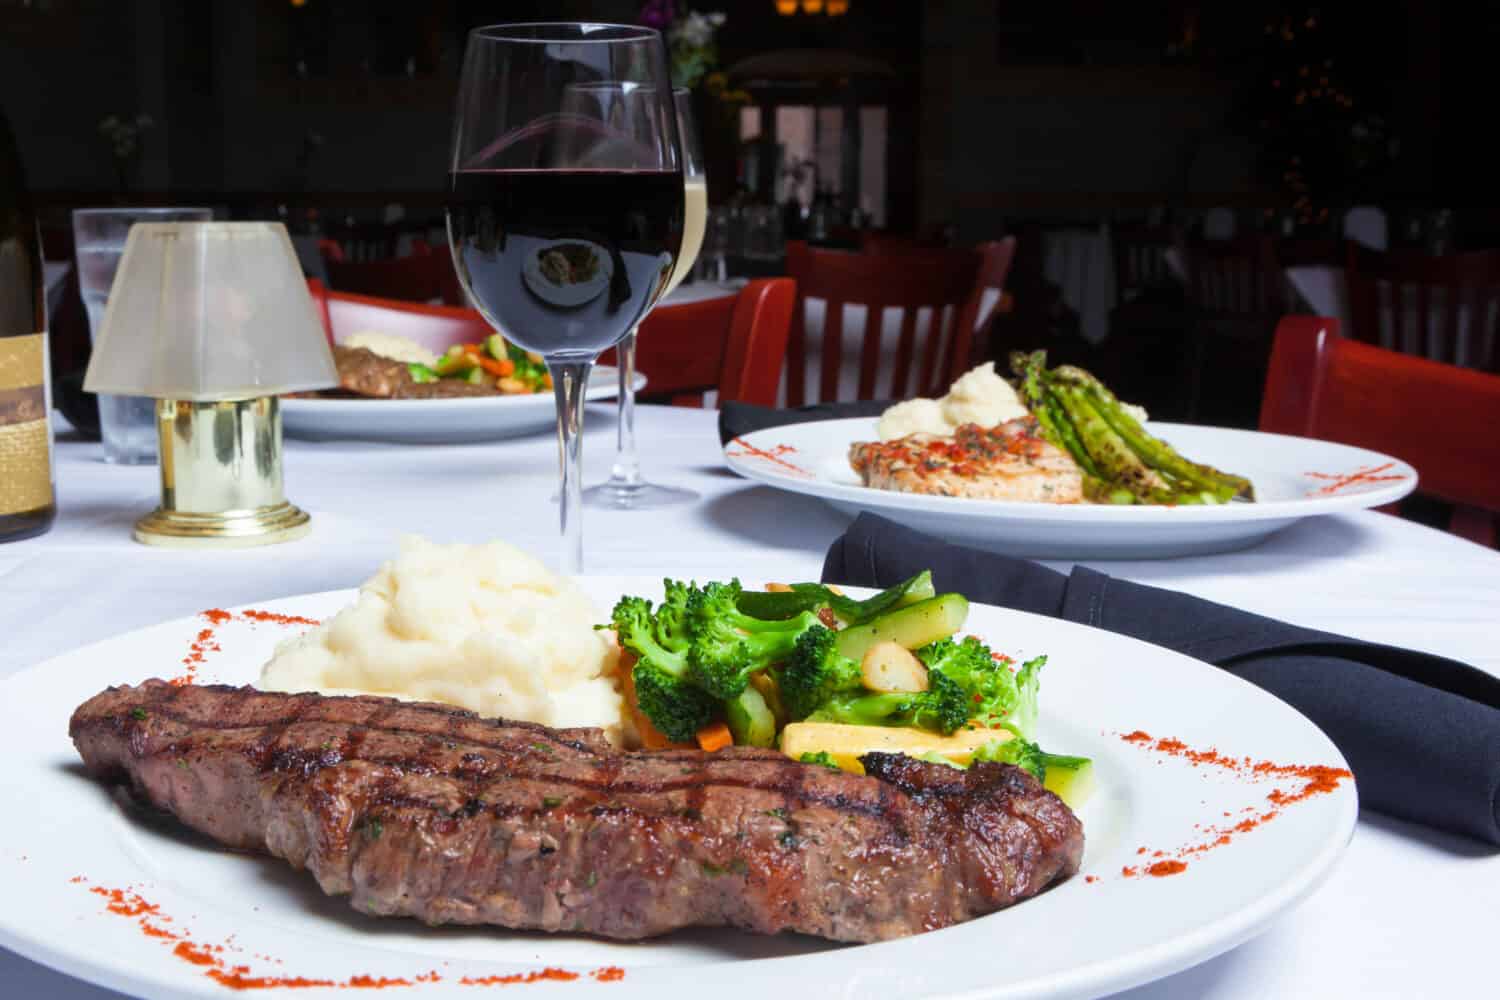 A white plate holds a delicious grilled New York Strip Steak with a side of mashed potatoes and fresh mixed vegetables.  A glass of red wine completes the meal.  